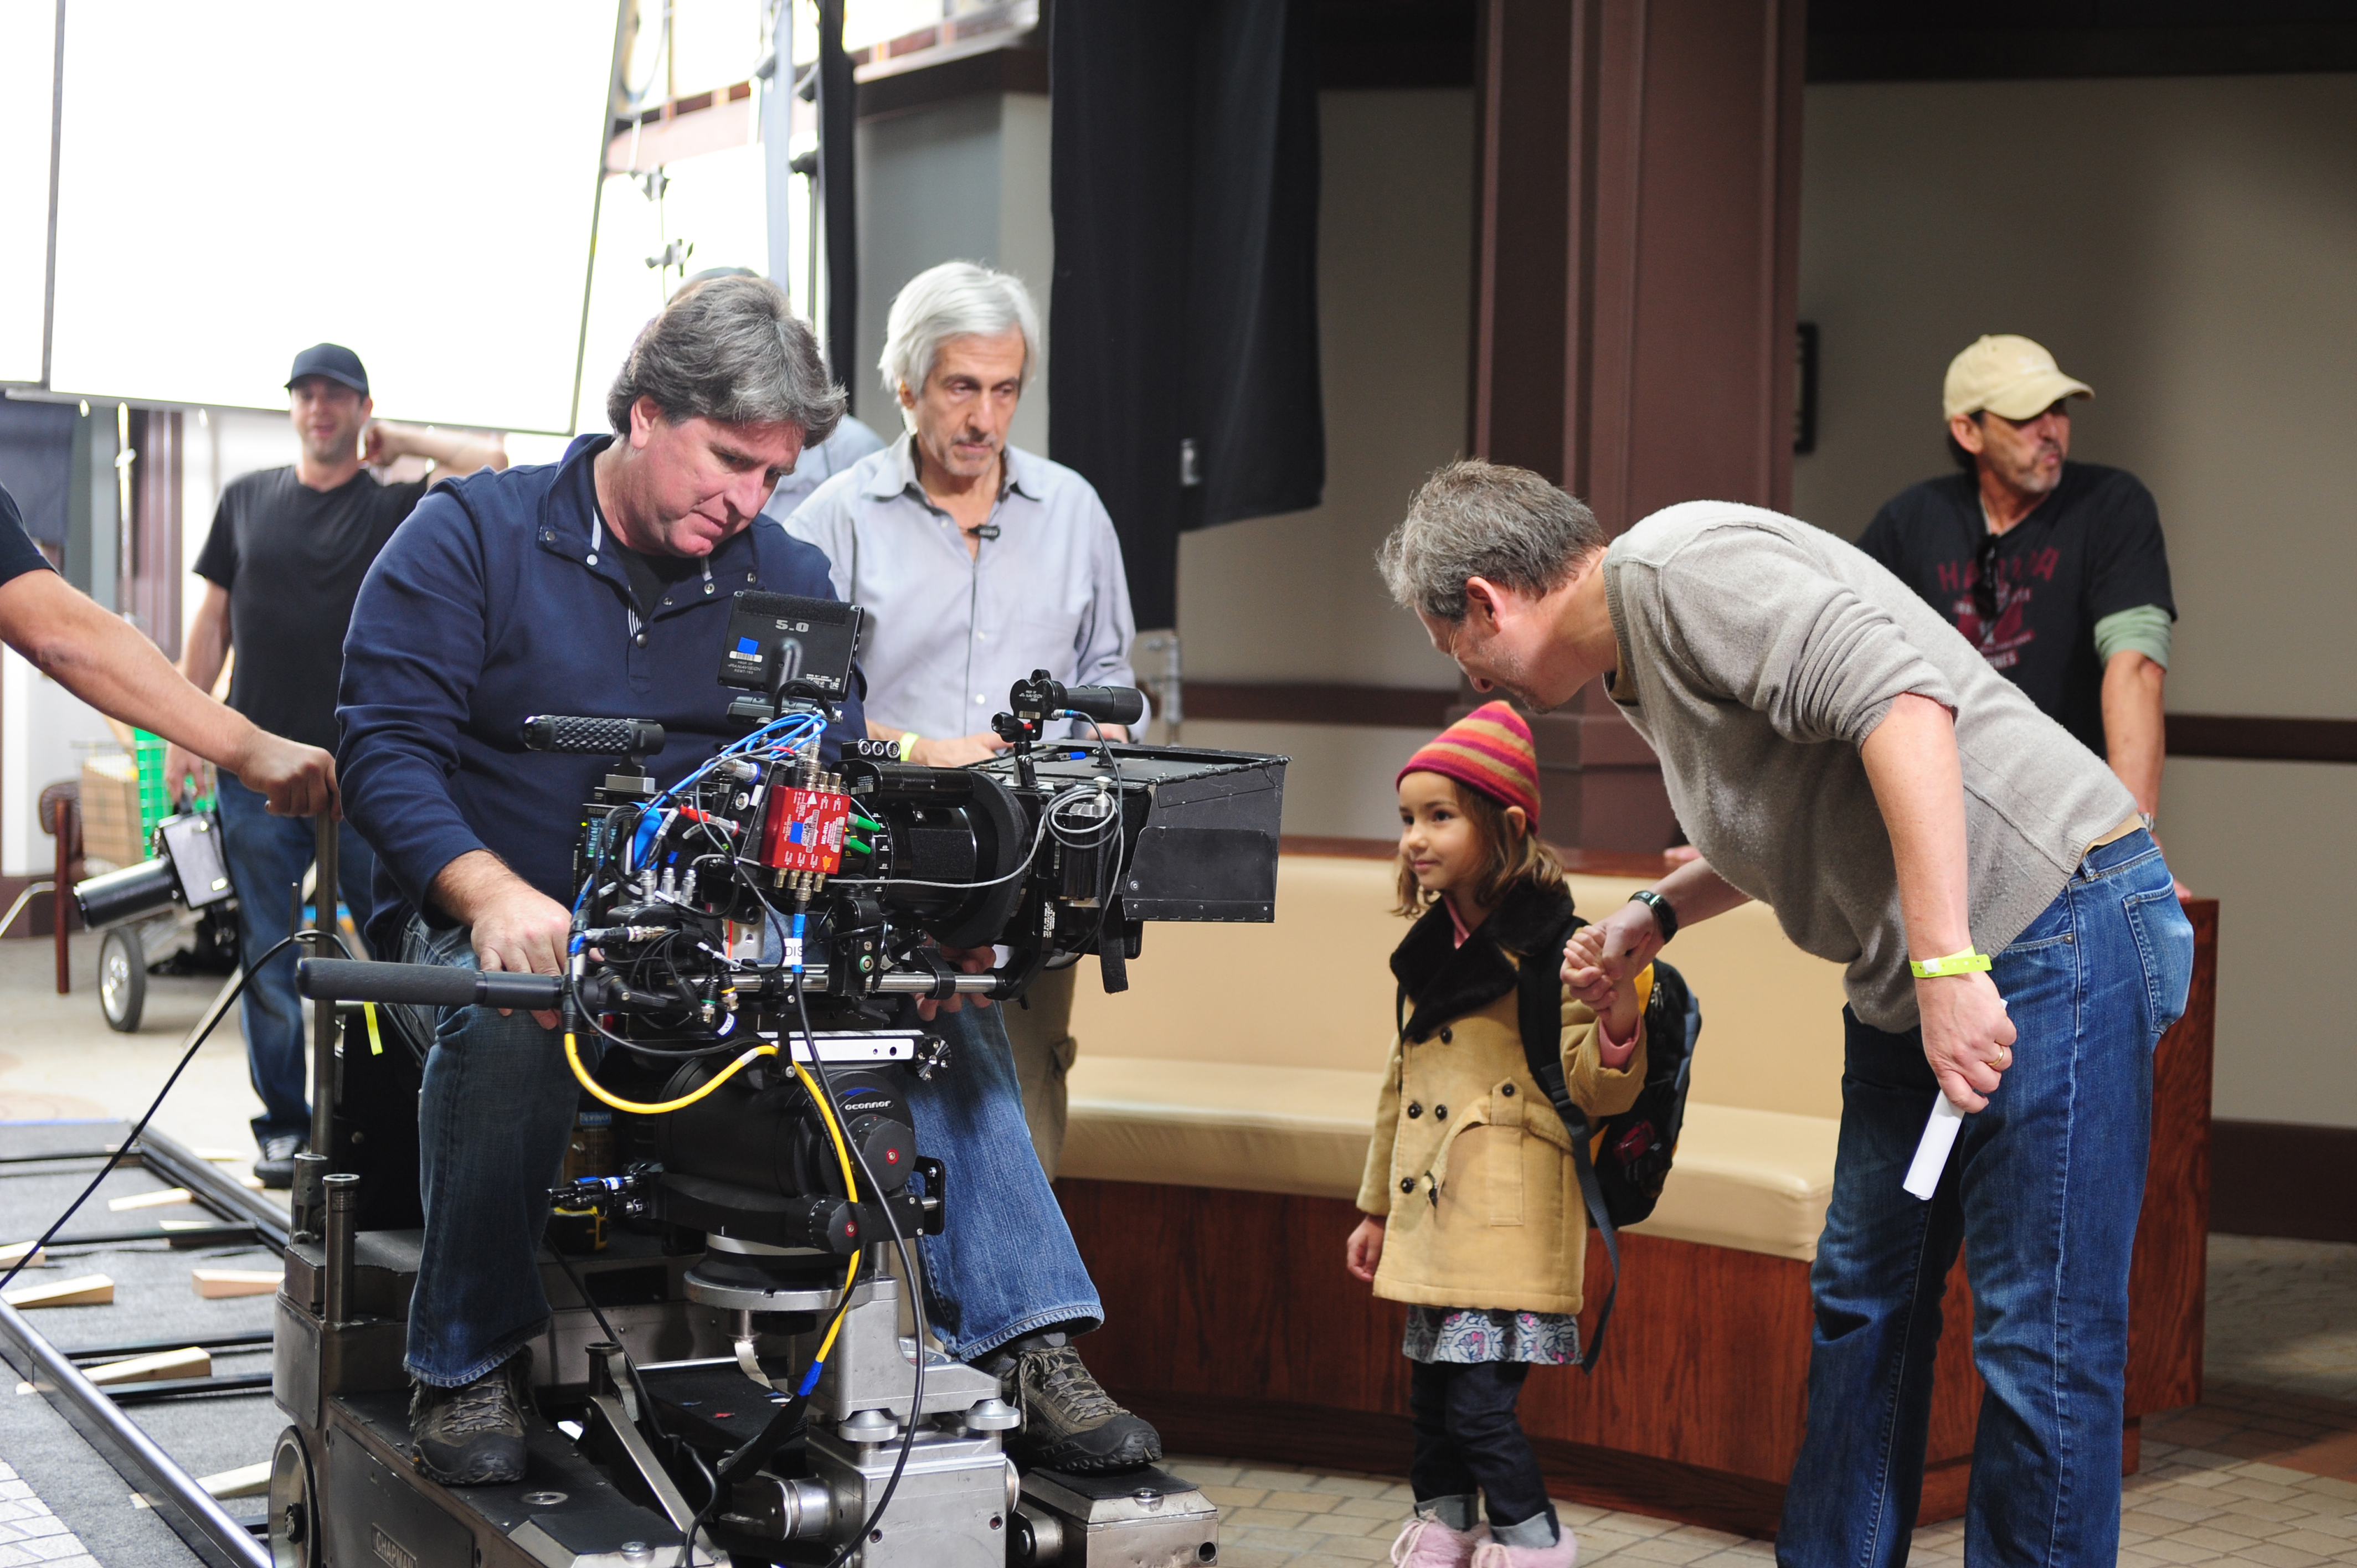 Liliana on set with director Ken Kwapis and crew.